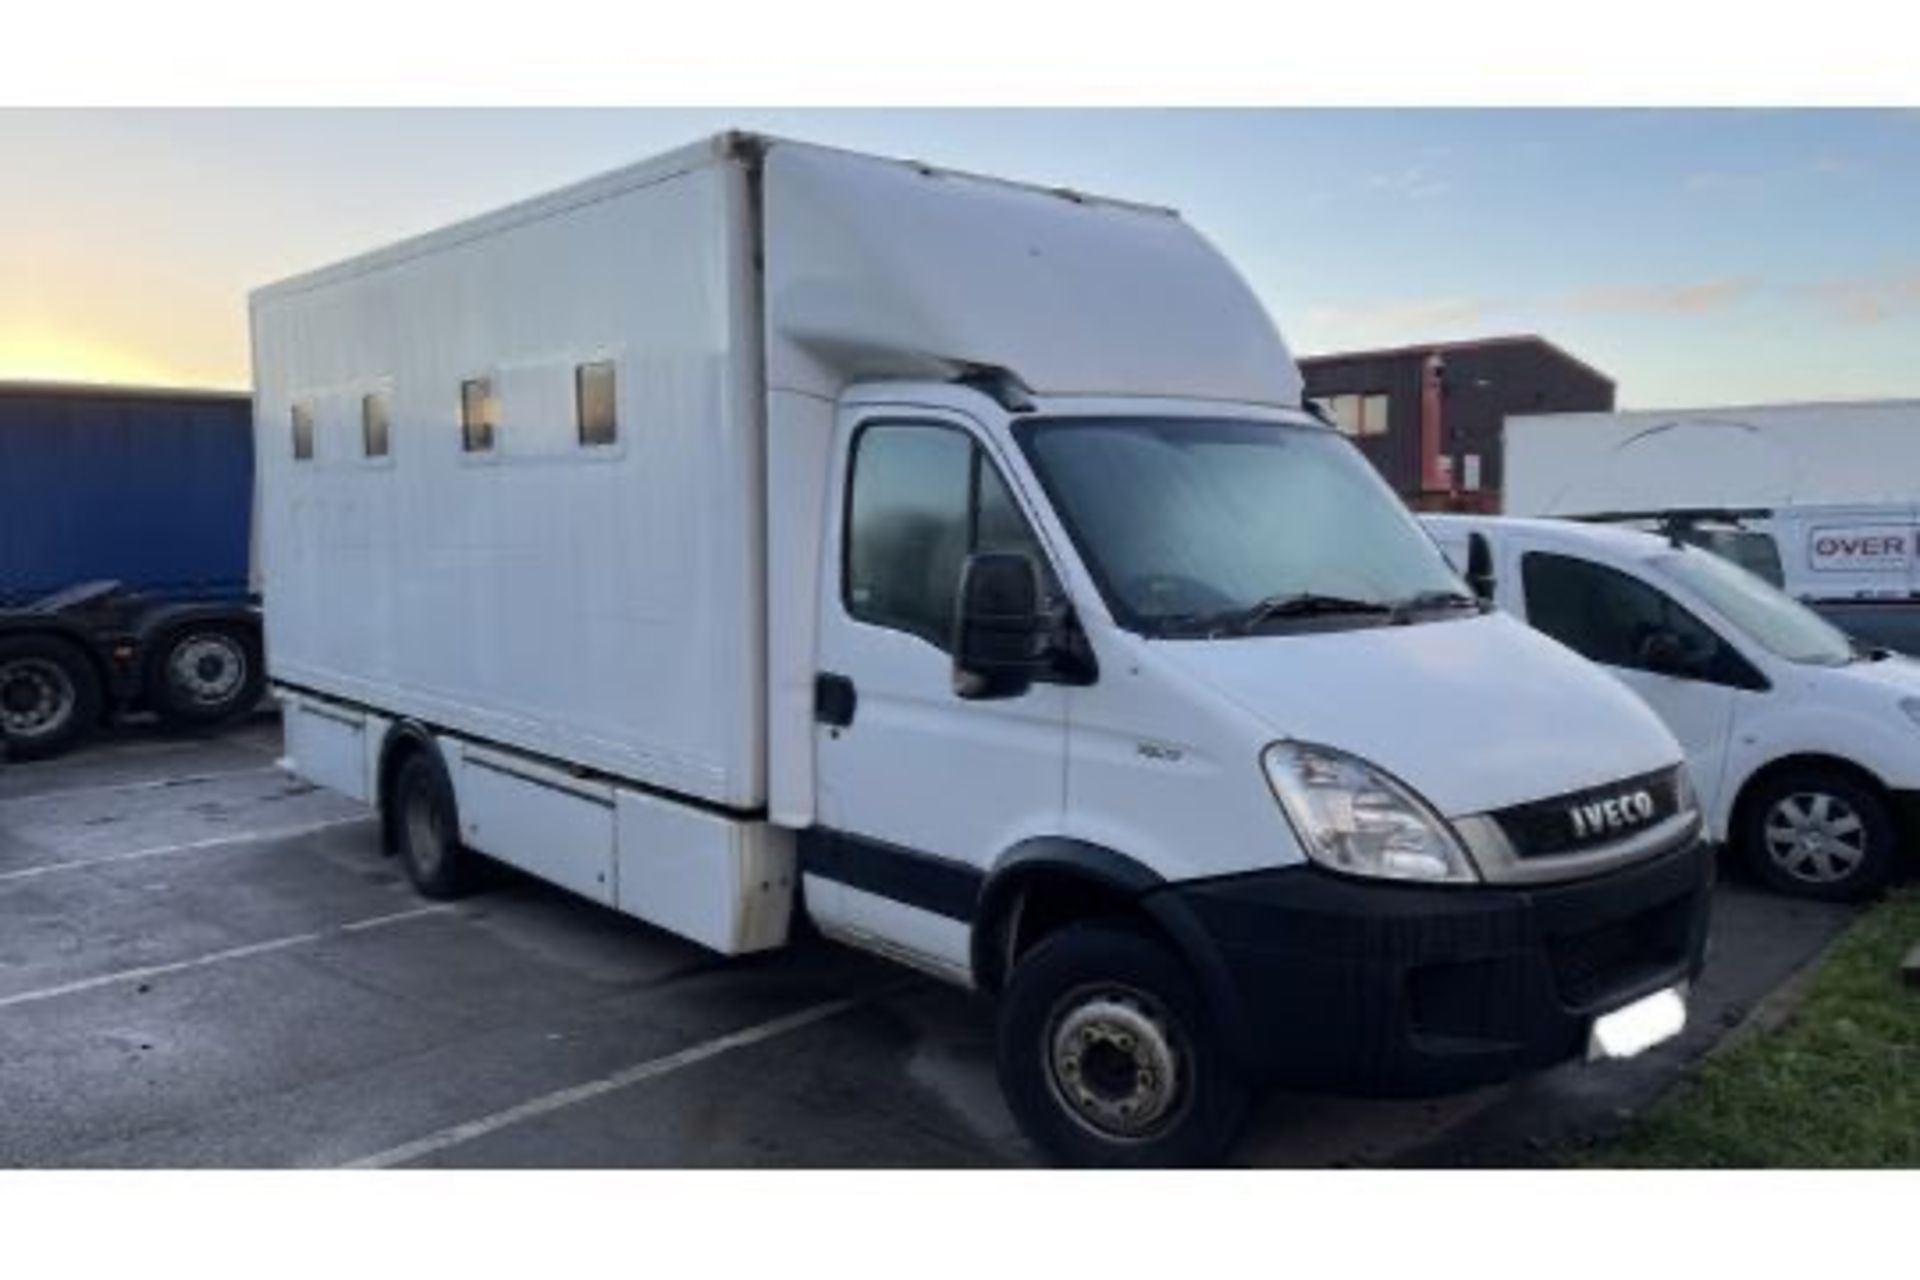 BX11 TCZ. 2011 IVECO DAILY 70C17. BOX VAN. 4X2. DIESEL MANUAL GEARBOX. REAR VIEW CAMERA 6 X SPEED - Image 2 of 24